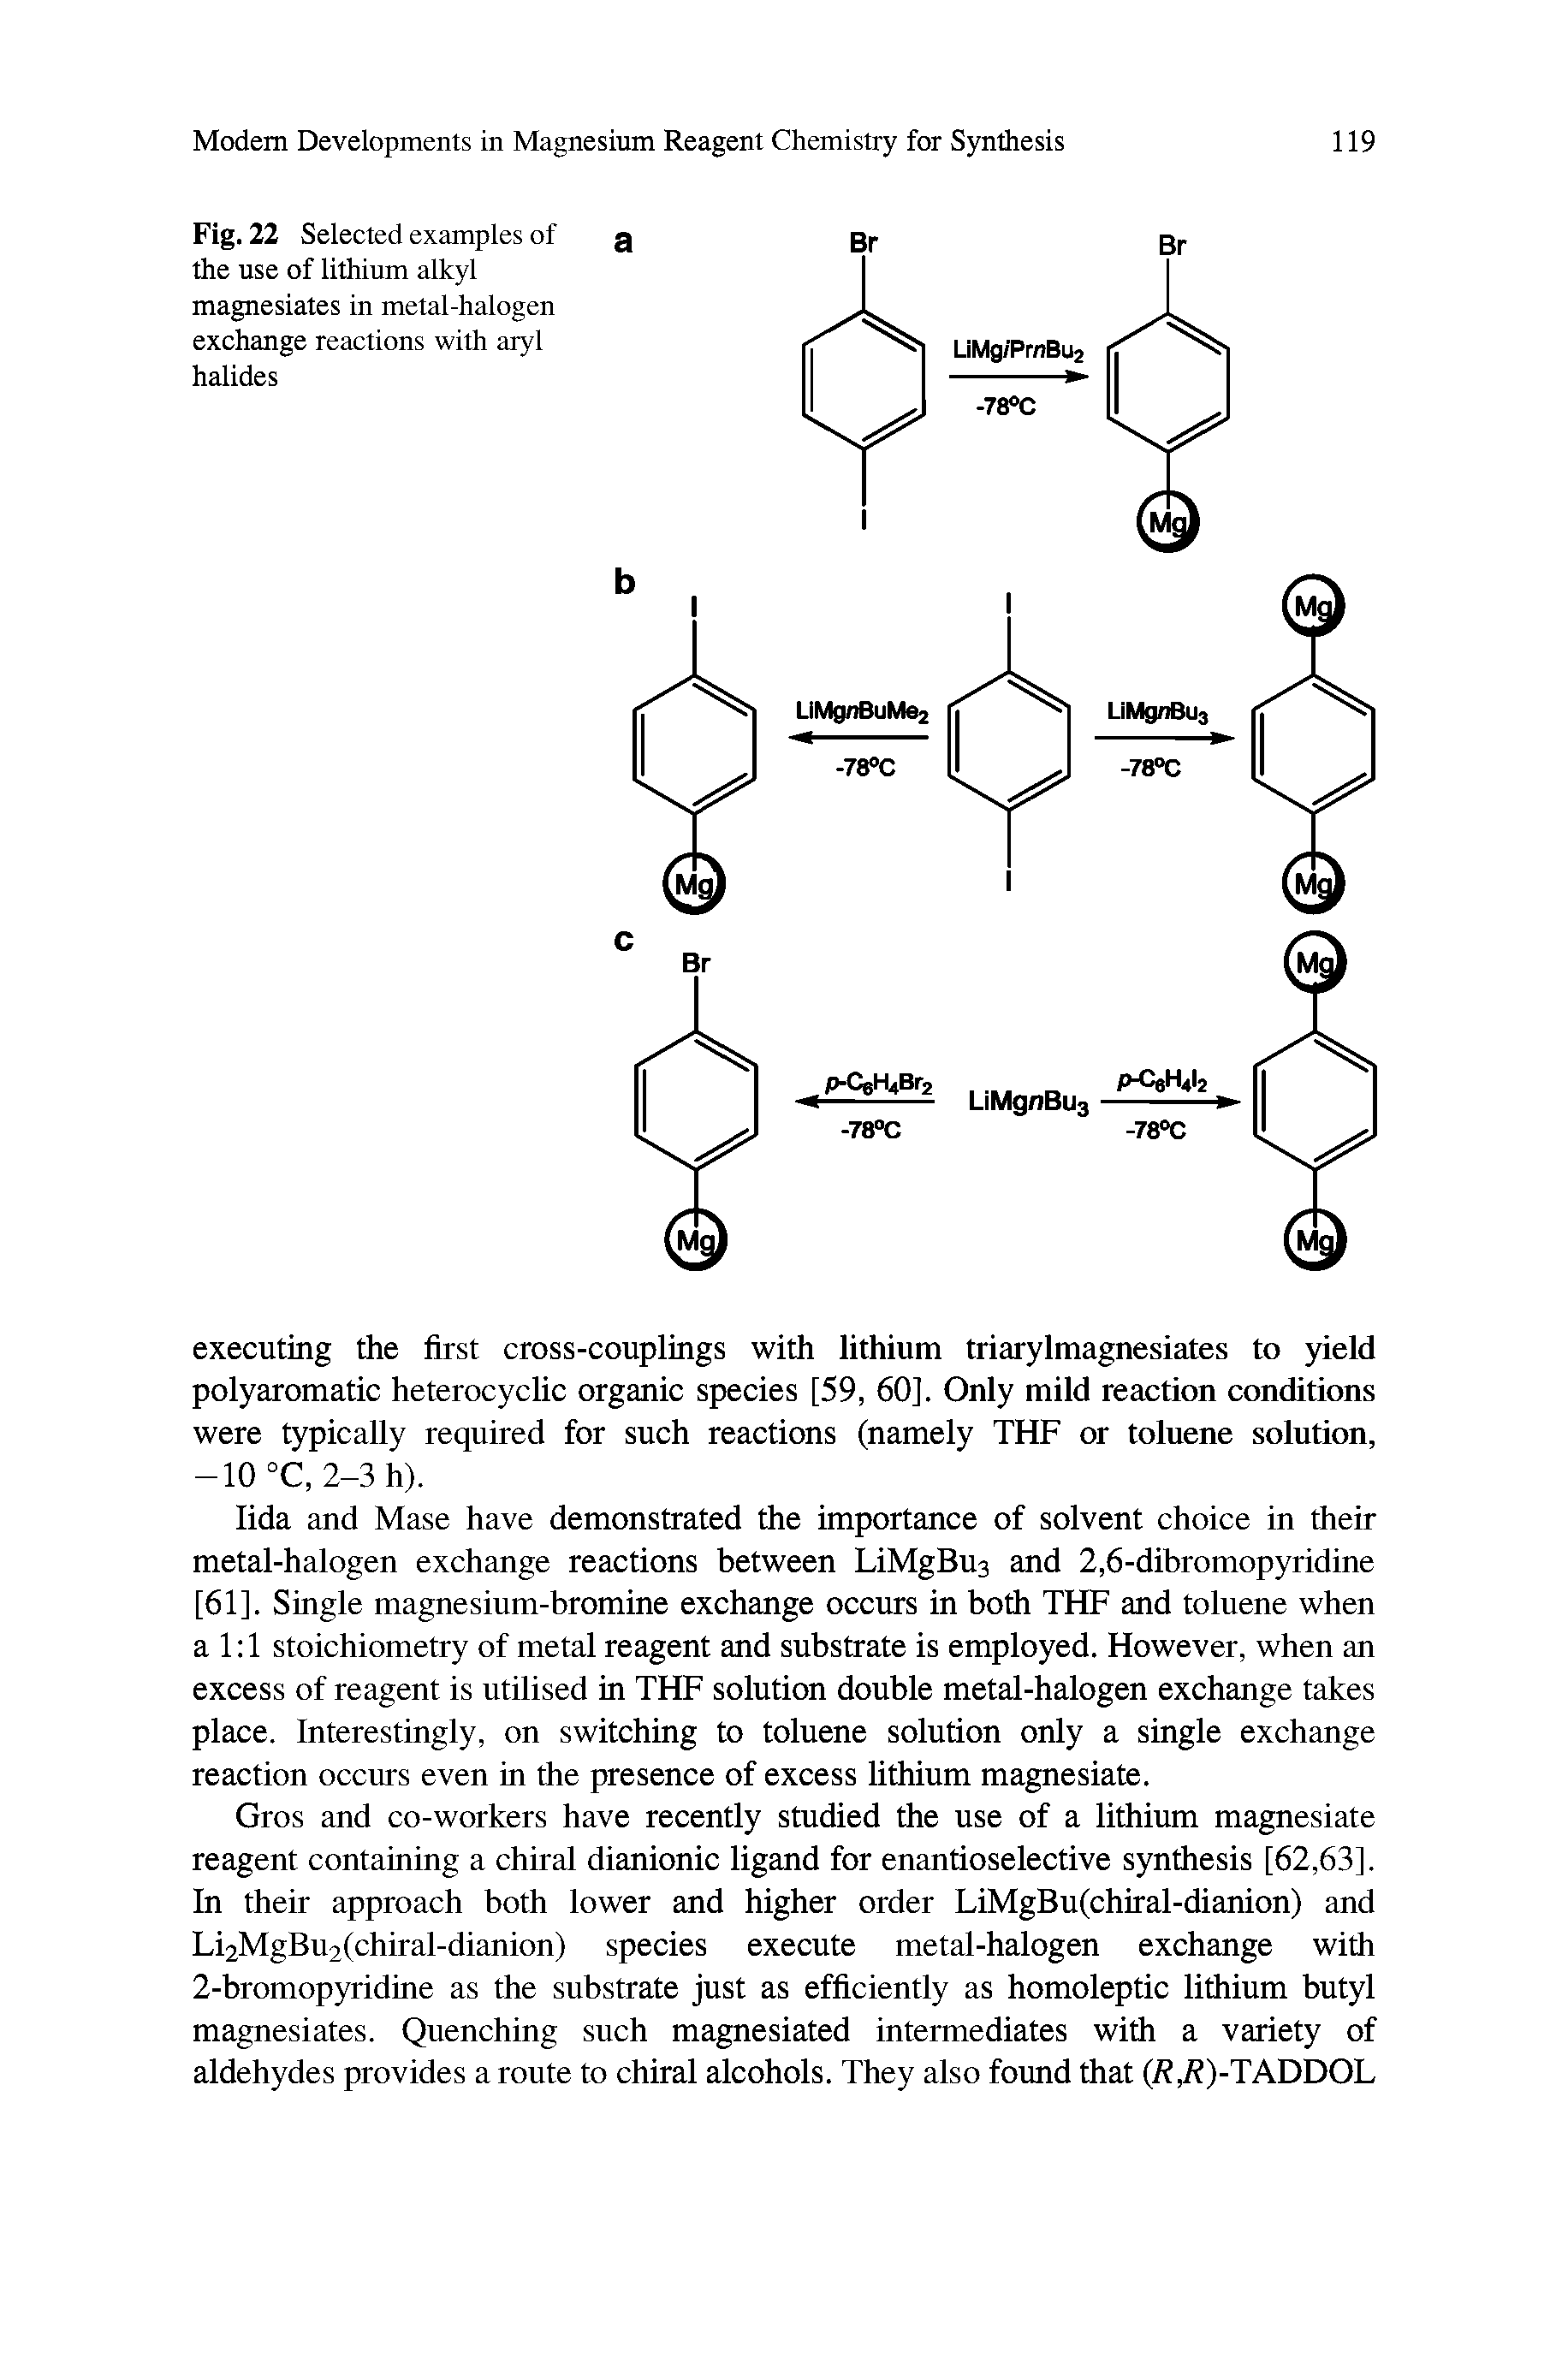 Fig. 22 Seiected examples of the use of lithium alkyl magnesiates in metal-halogen exchange reactions with aryl halides...